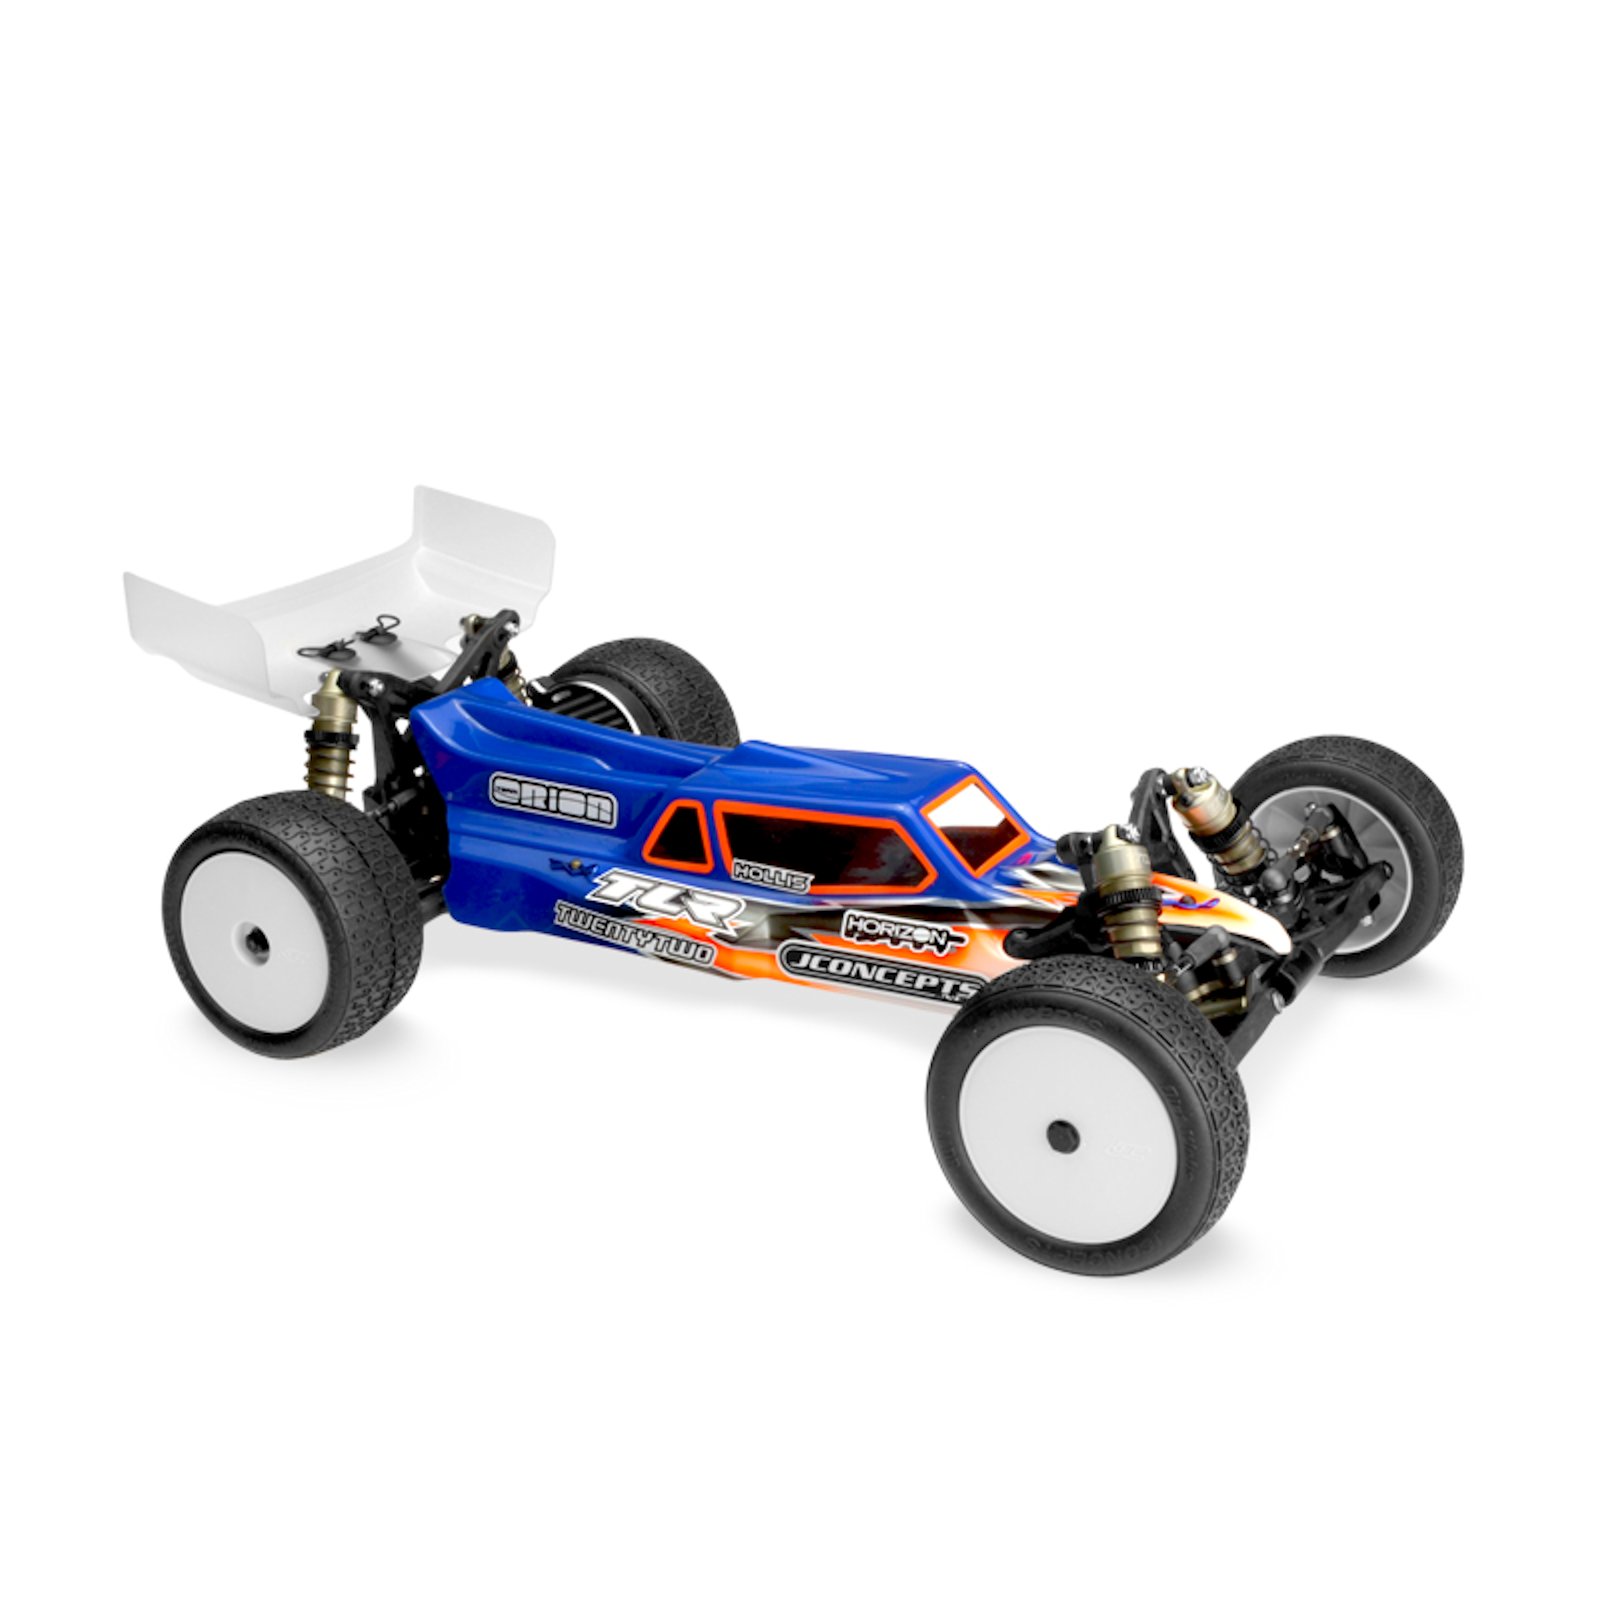 TLR 22 3.0 Body with 6.5 Wing